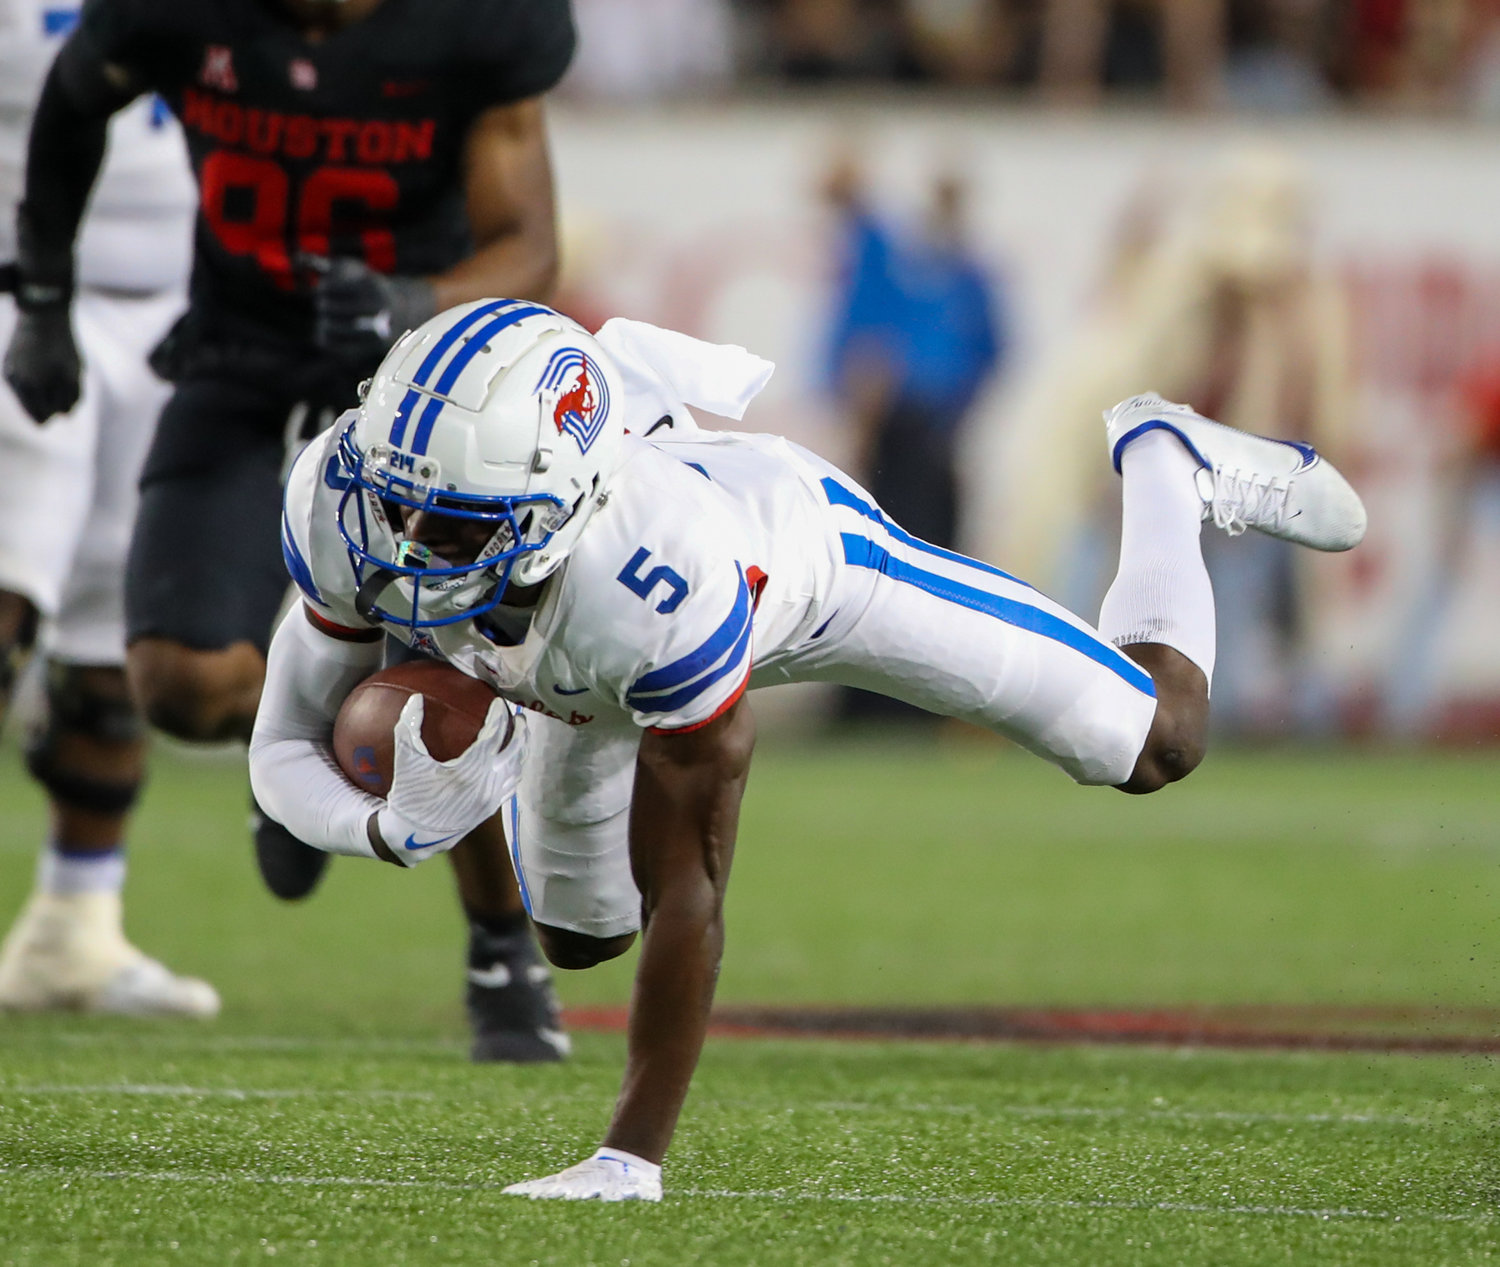 SMU Mustangs wide receiver Danny Gray (5) goes down after a reception during an NCAA football game between Houston and SMU on October 30, 2021 in Houston, Texas.